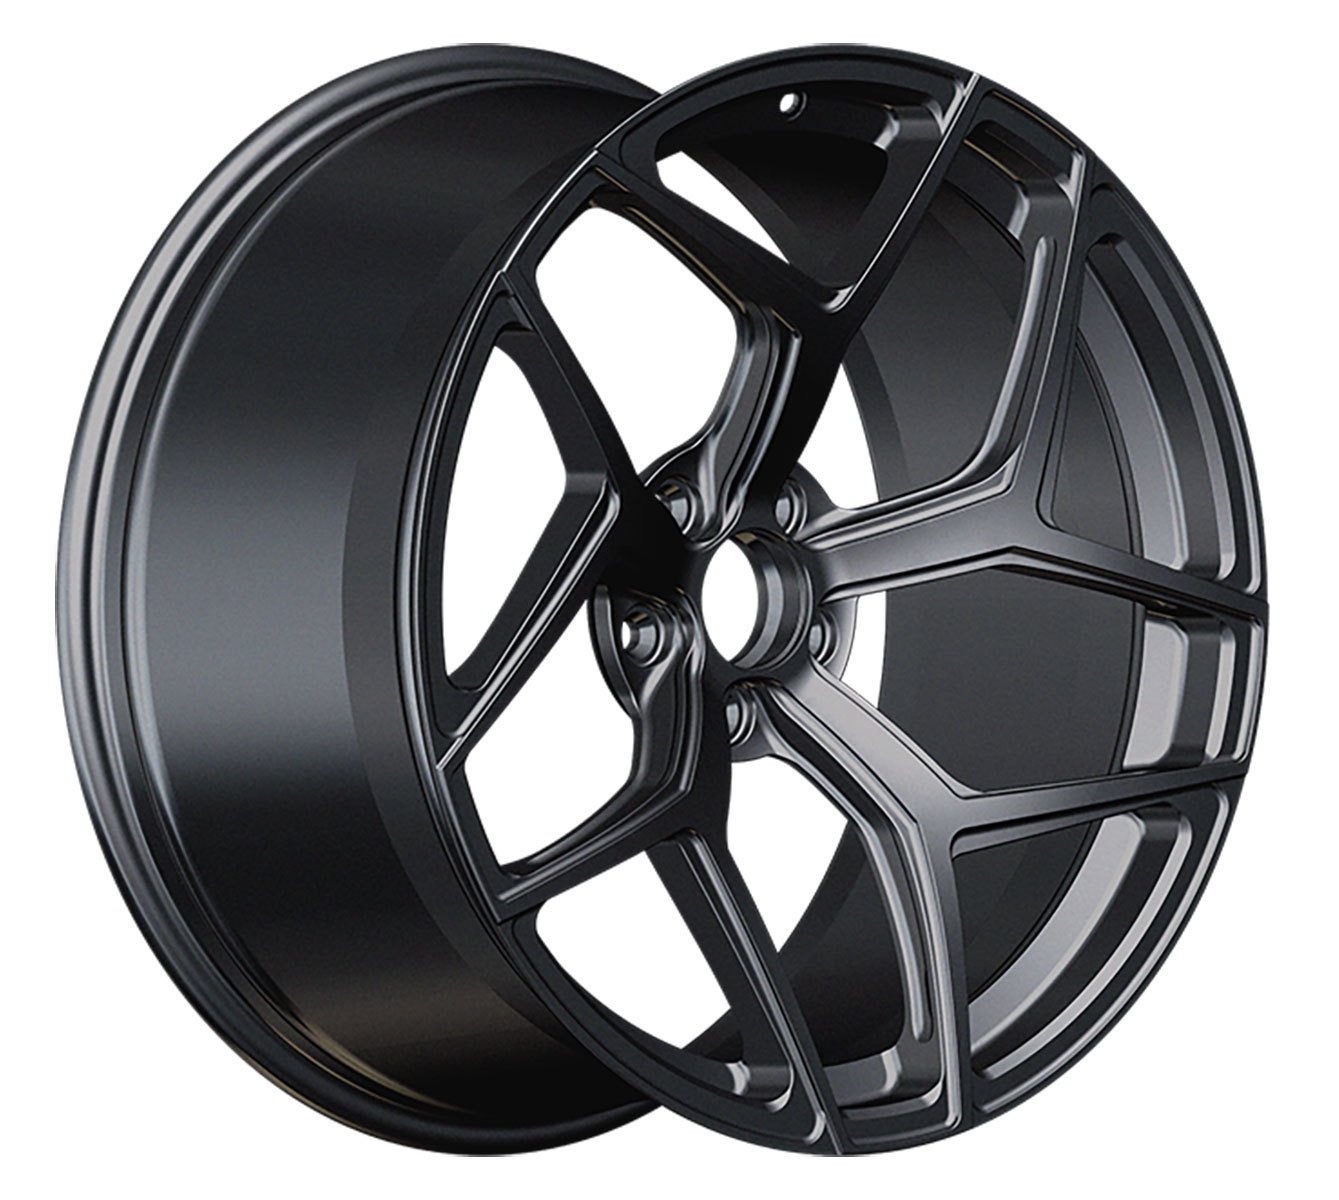 Beneventi K5S forged wheels